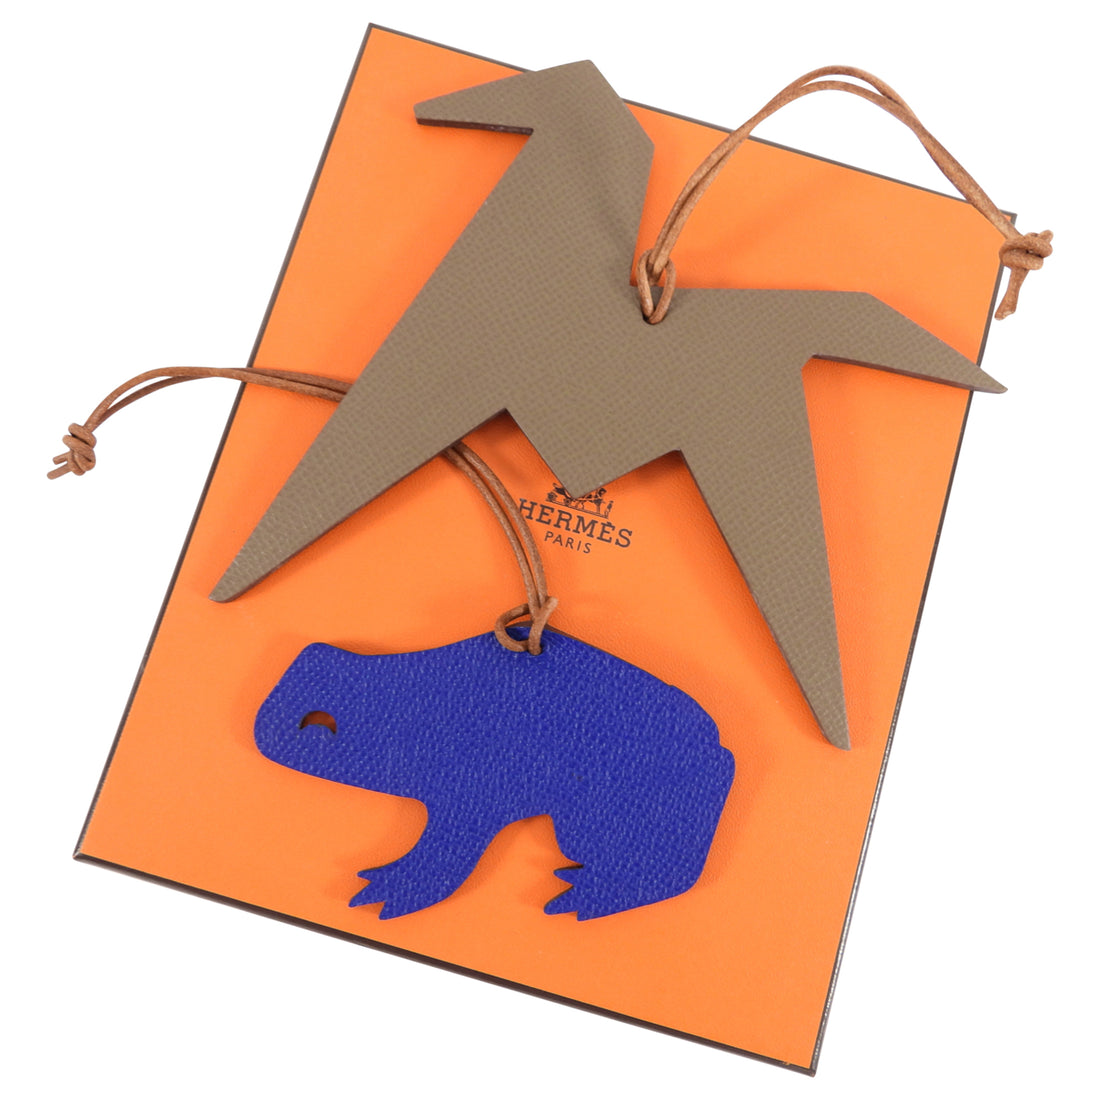 Hermes 2017 Frog and Origami Petit H Bag Charms / Holiday Ornaments